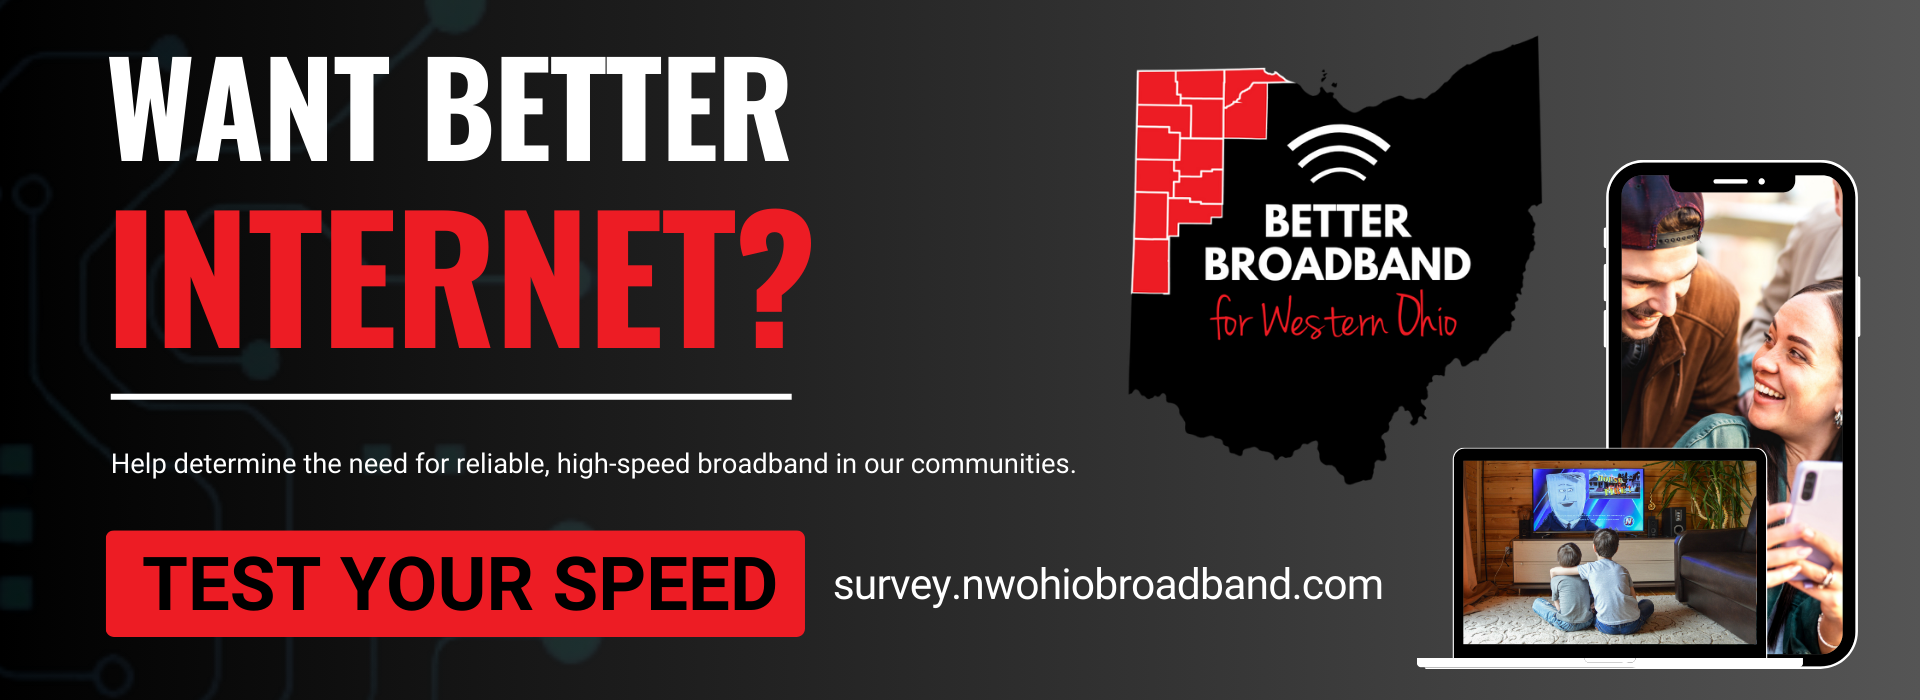 Want better internet? Complete this survey